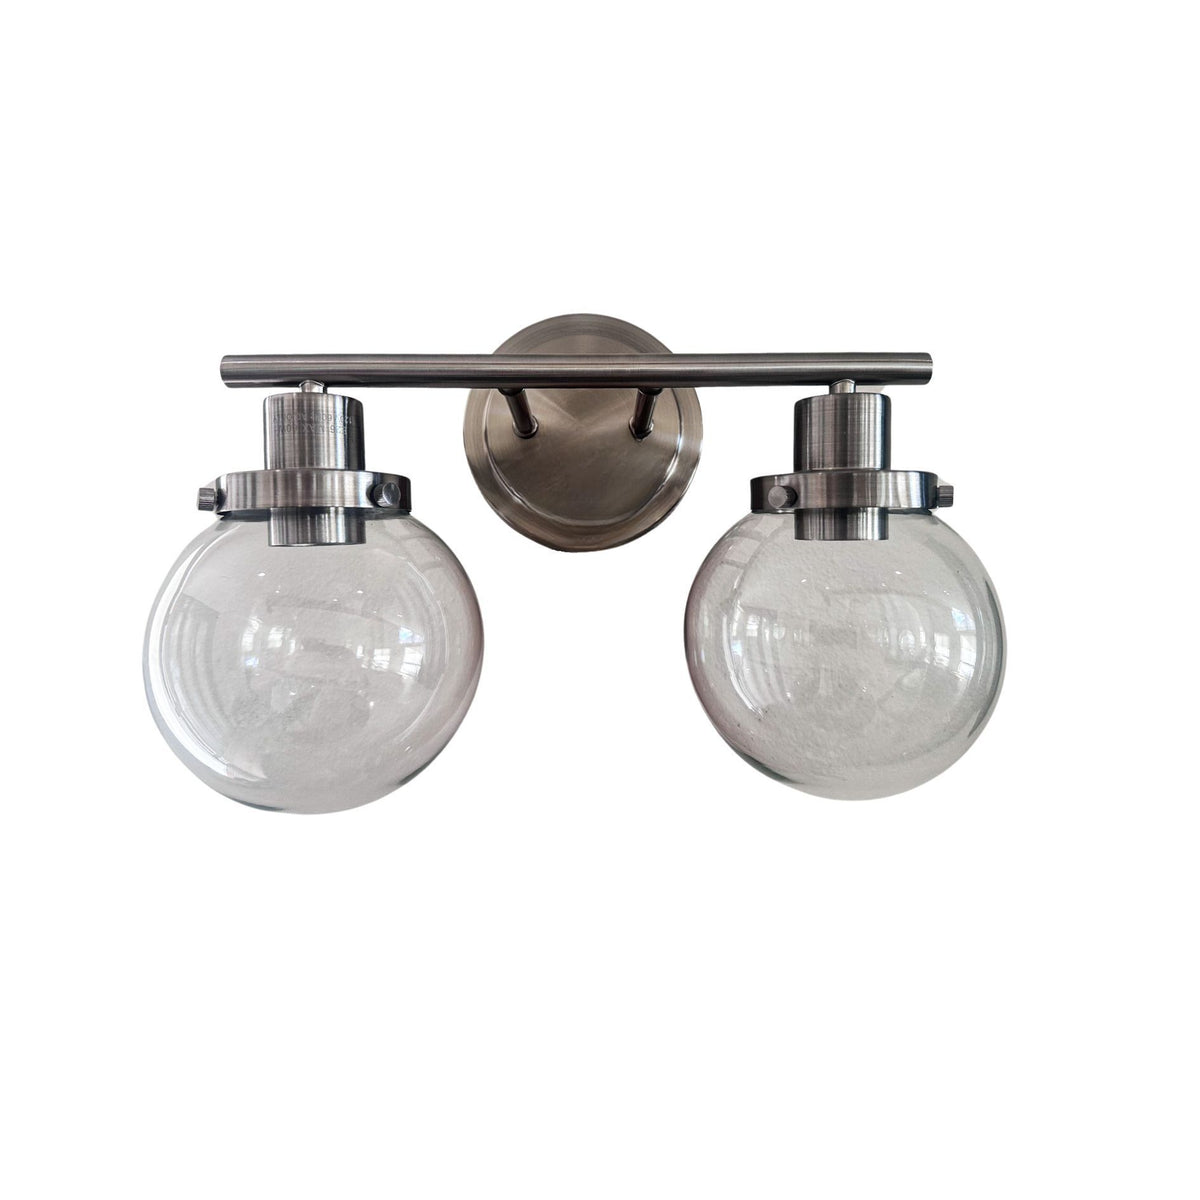 Bathroom Vanity Light Fixtures, 2-Light Black Wall Sconce Lighting Wall Lamp with Clear Glass Shade, Vintage Wall Mounted Lights Bathroom Lights